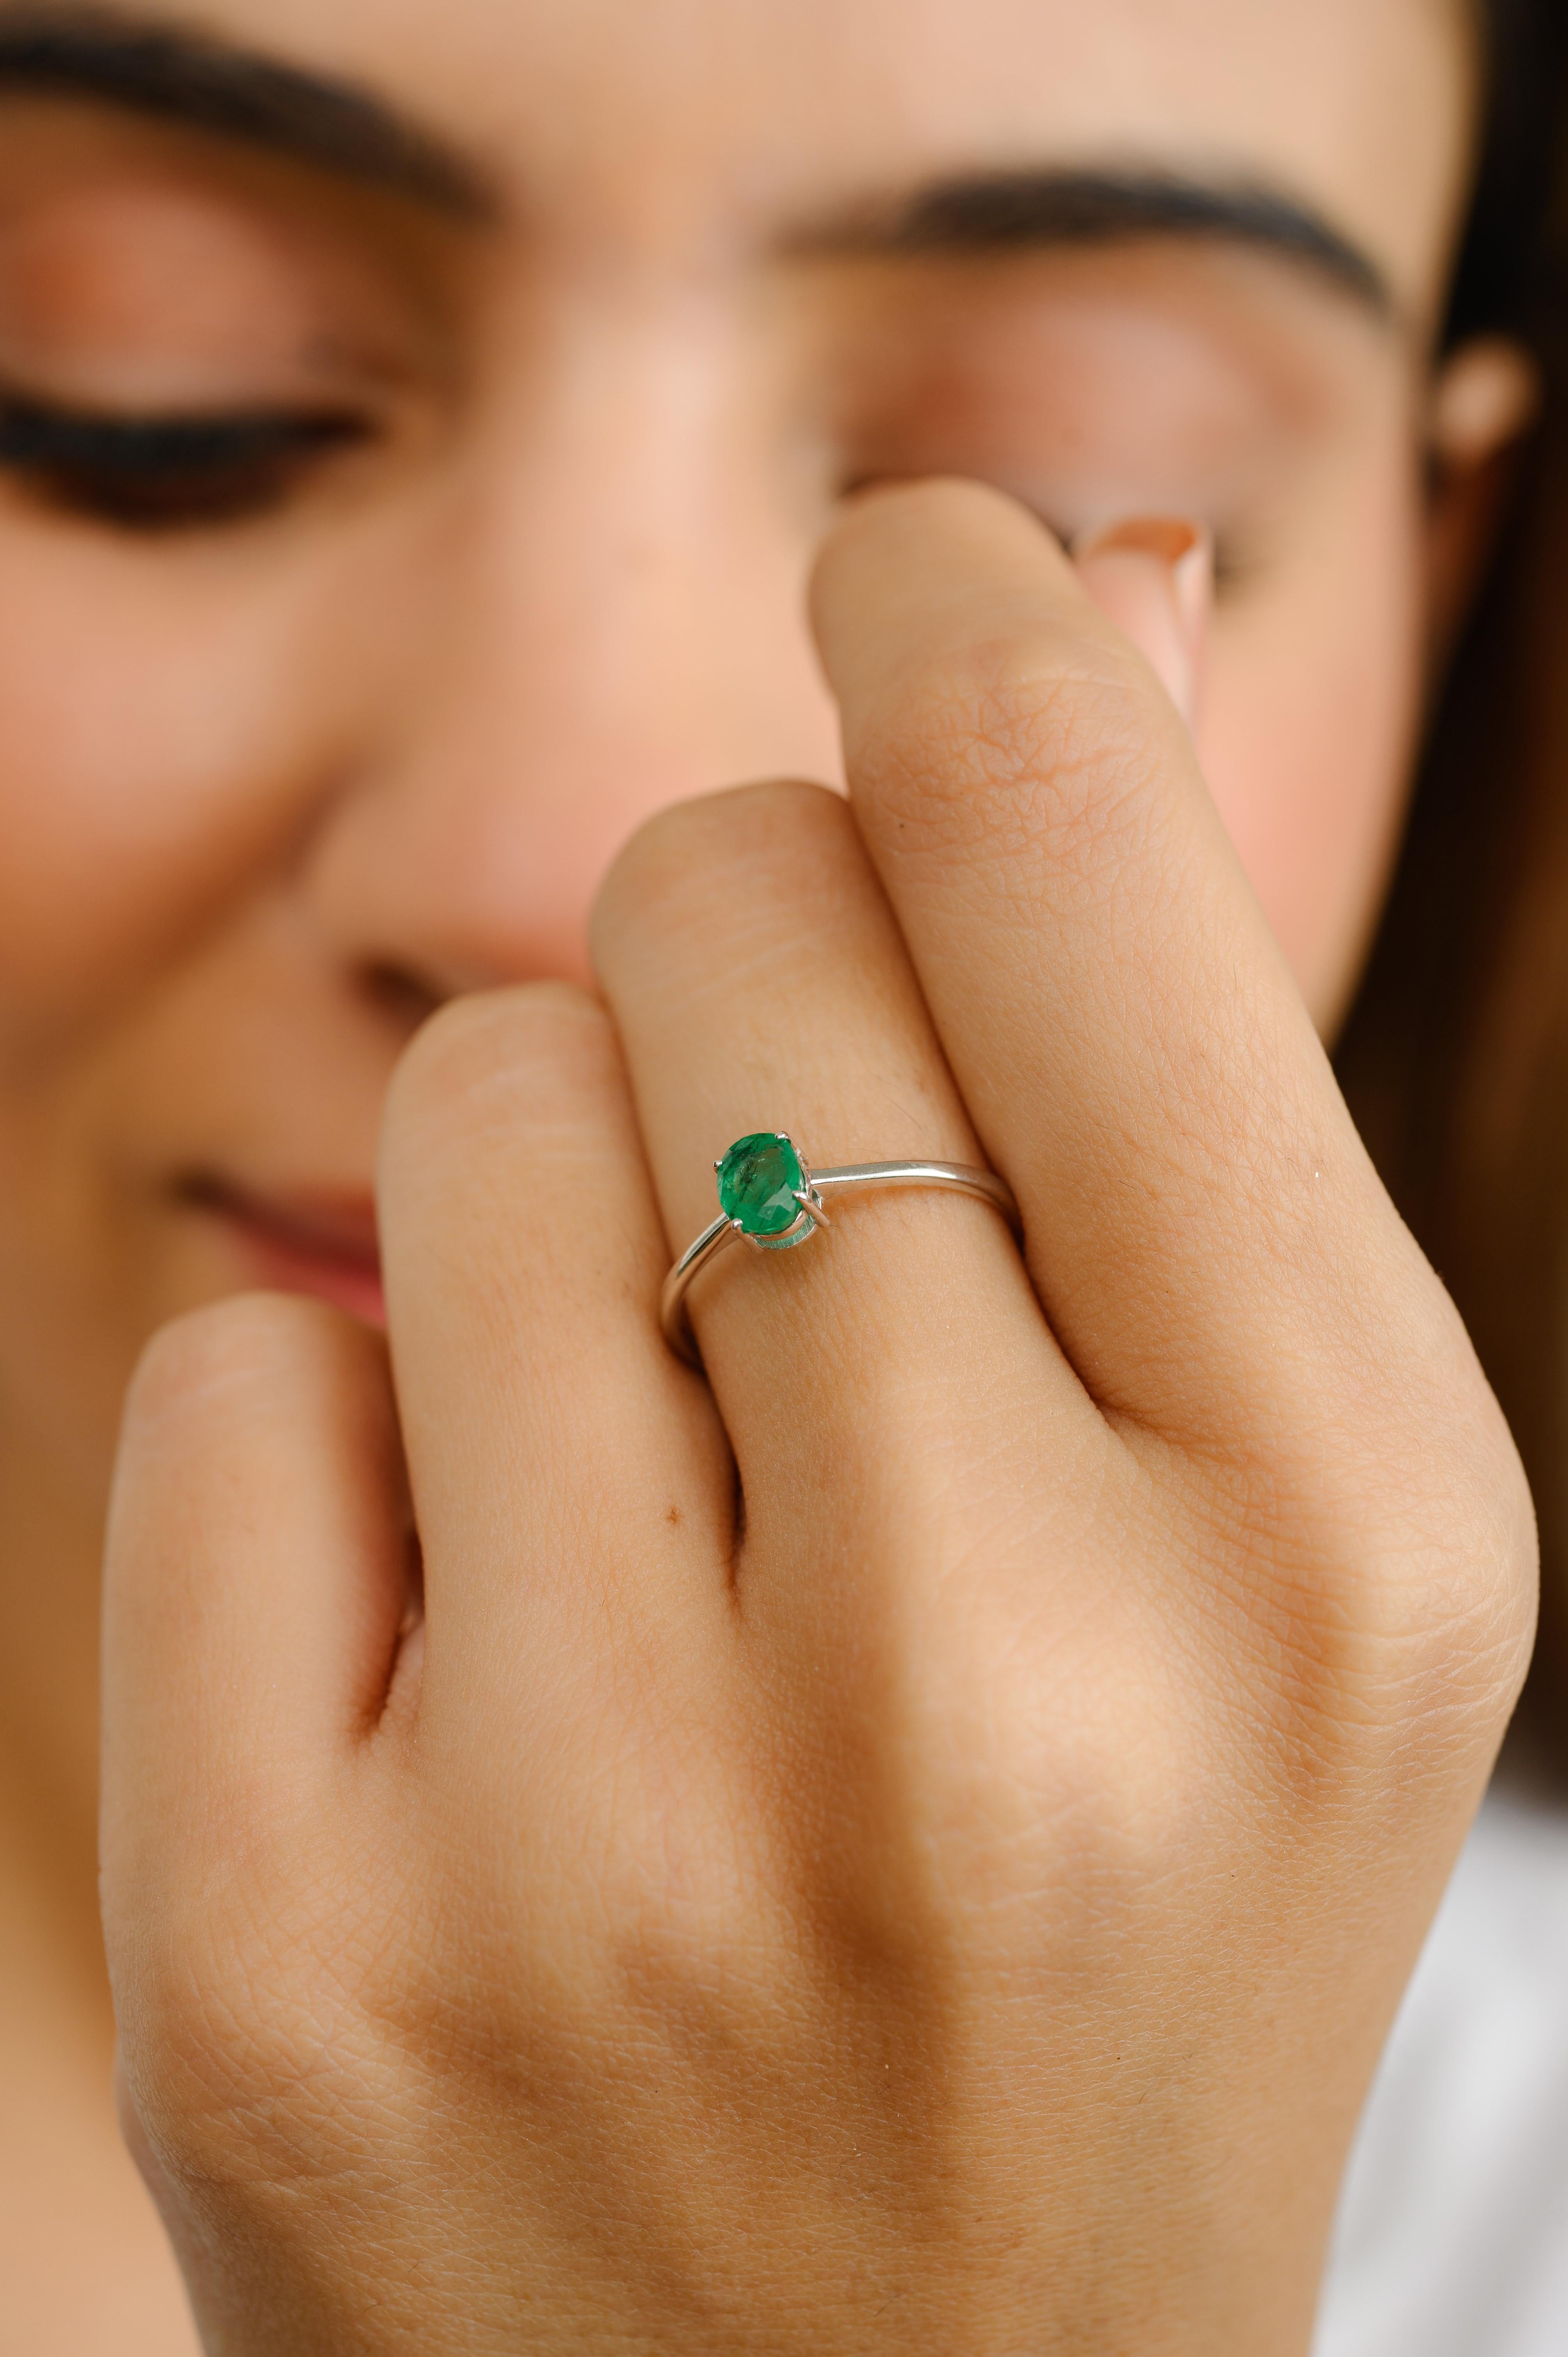 For Sale:  Handmade Natural Emerald Ring 18k Solid White Gold Minimalist Jewelry for Her 5